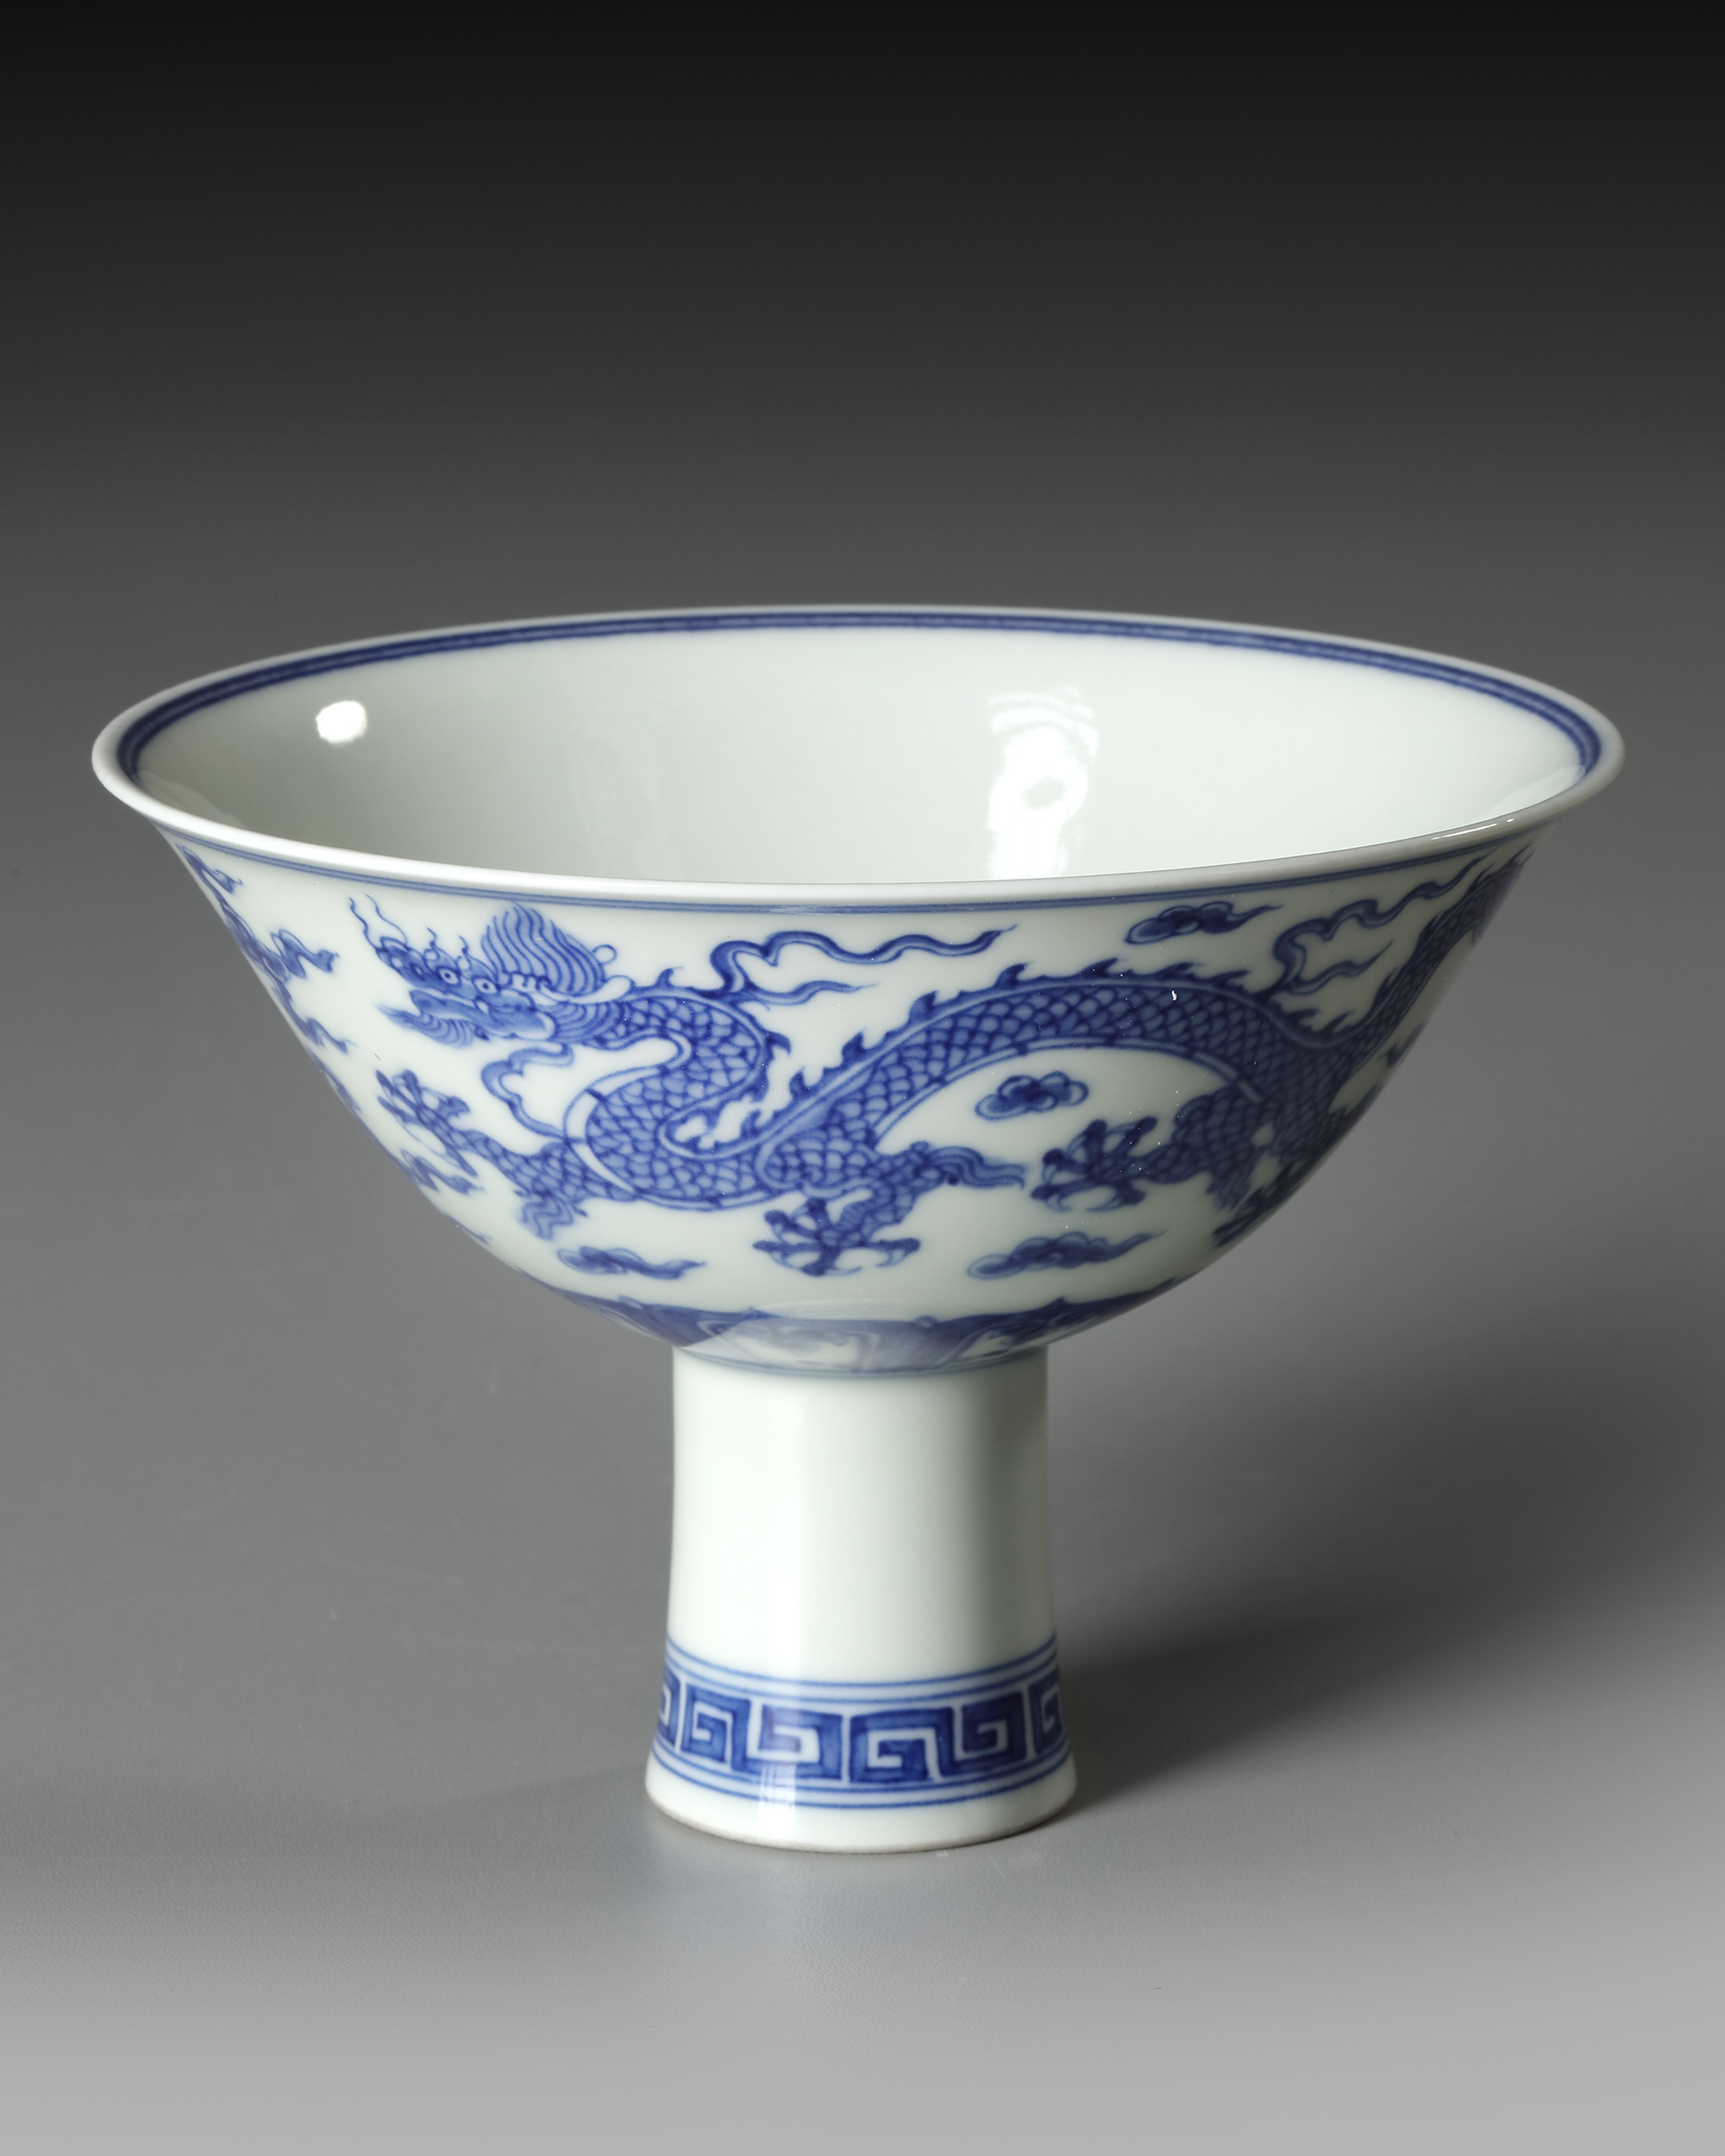 A CHINESE BLUE AND WHITE DRAGONS STEM BOWL, QING DYNASTY (1644-1911) - Image 2 of 5